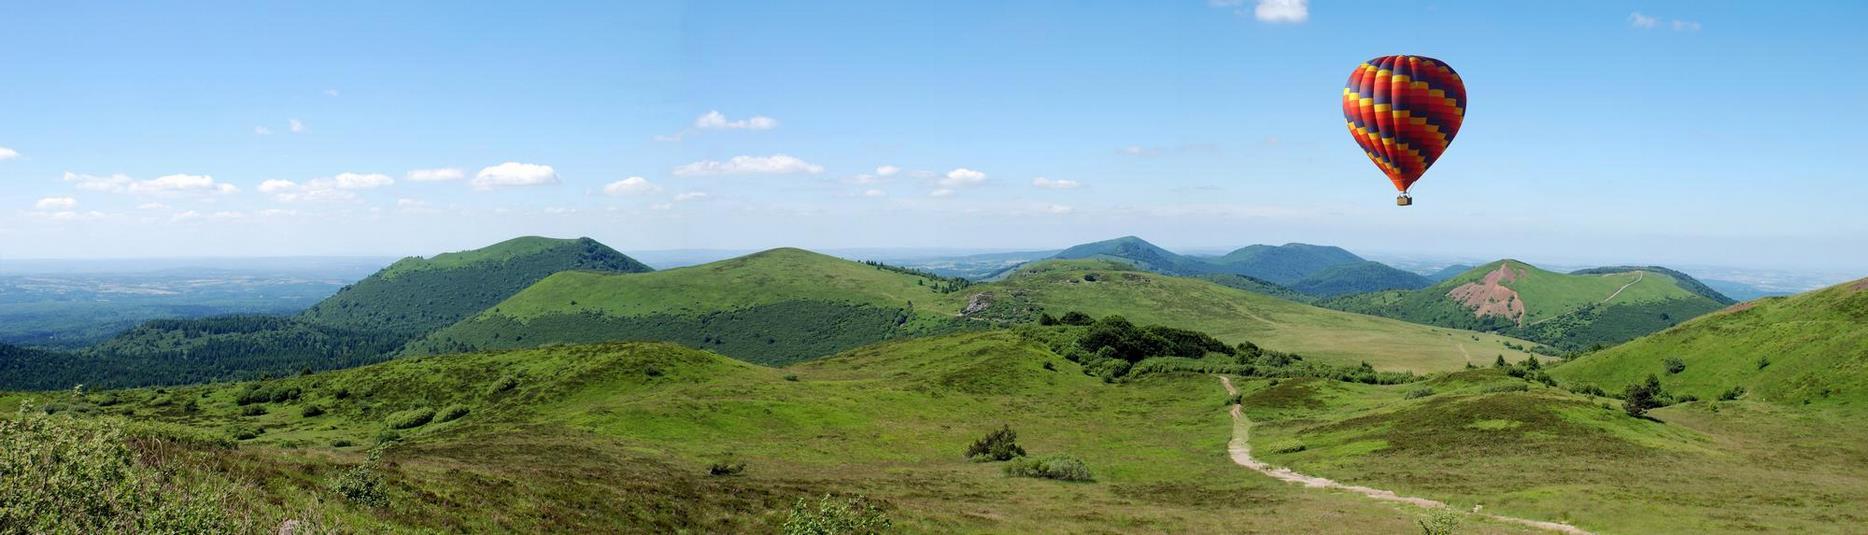 Panoramic of the Volcanoes of Auvergne